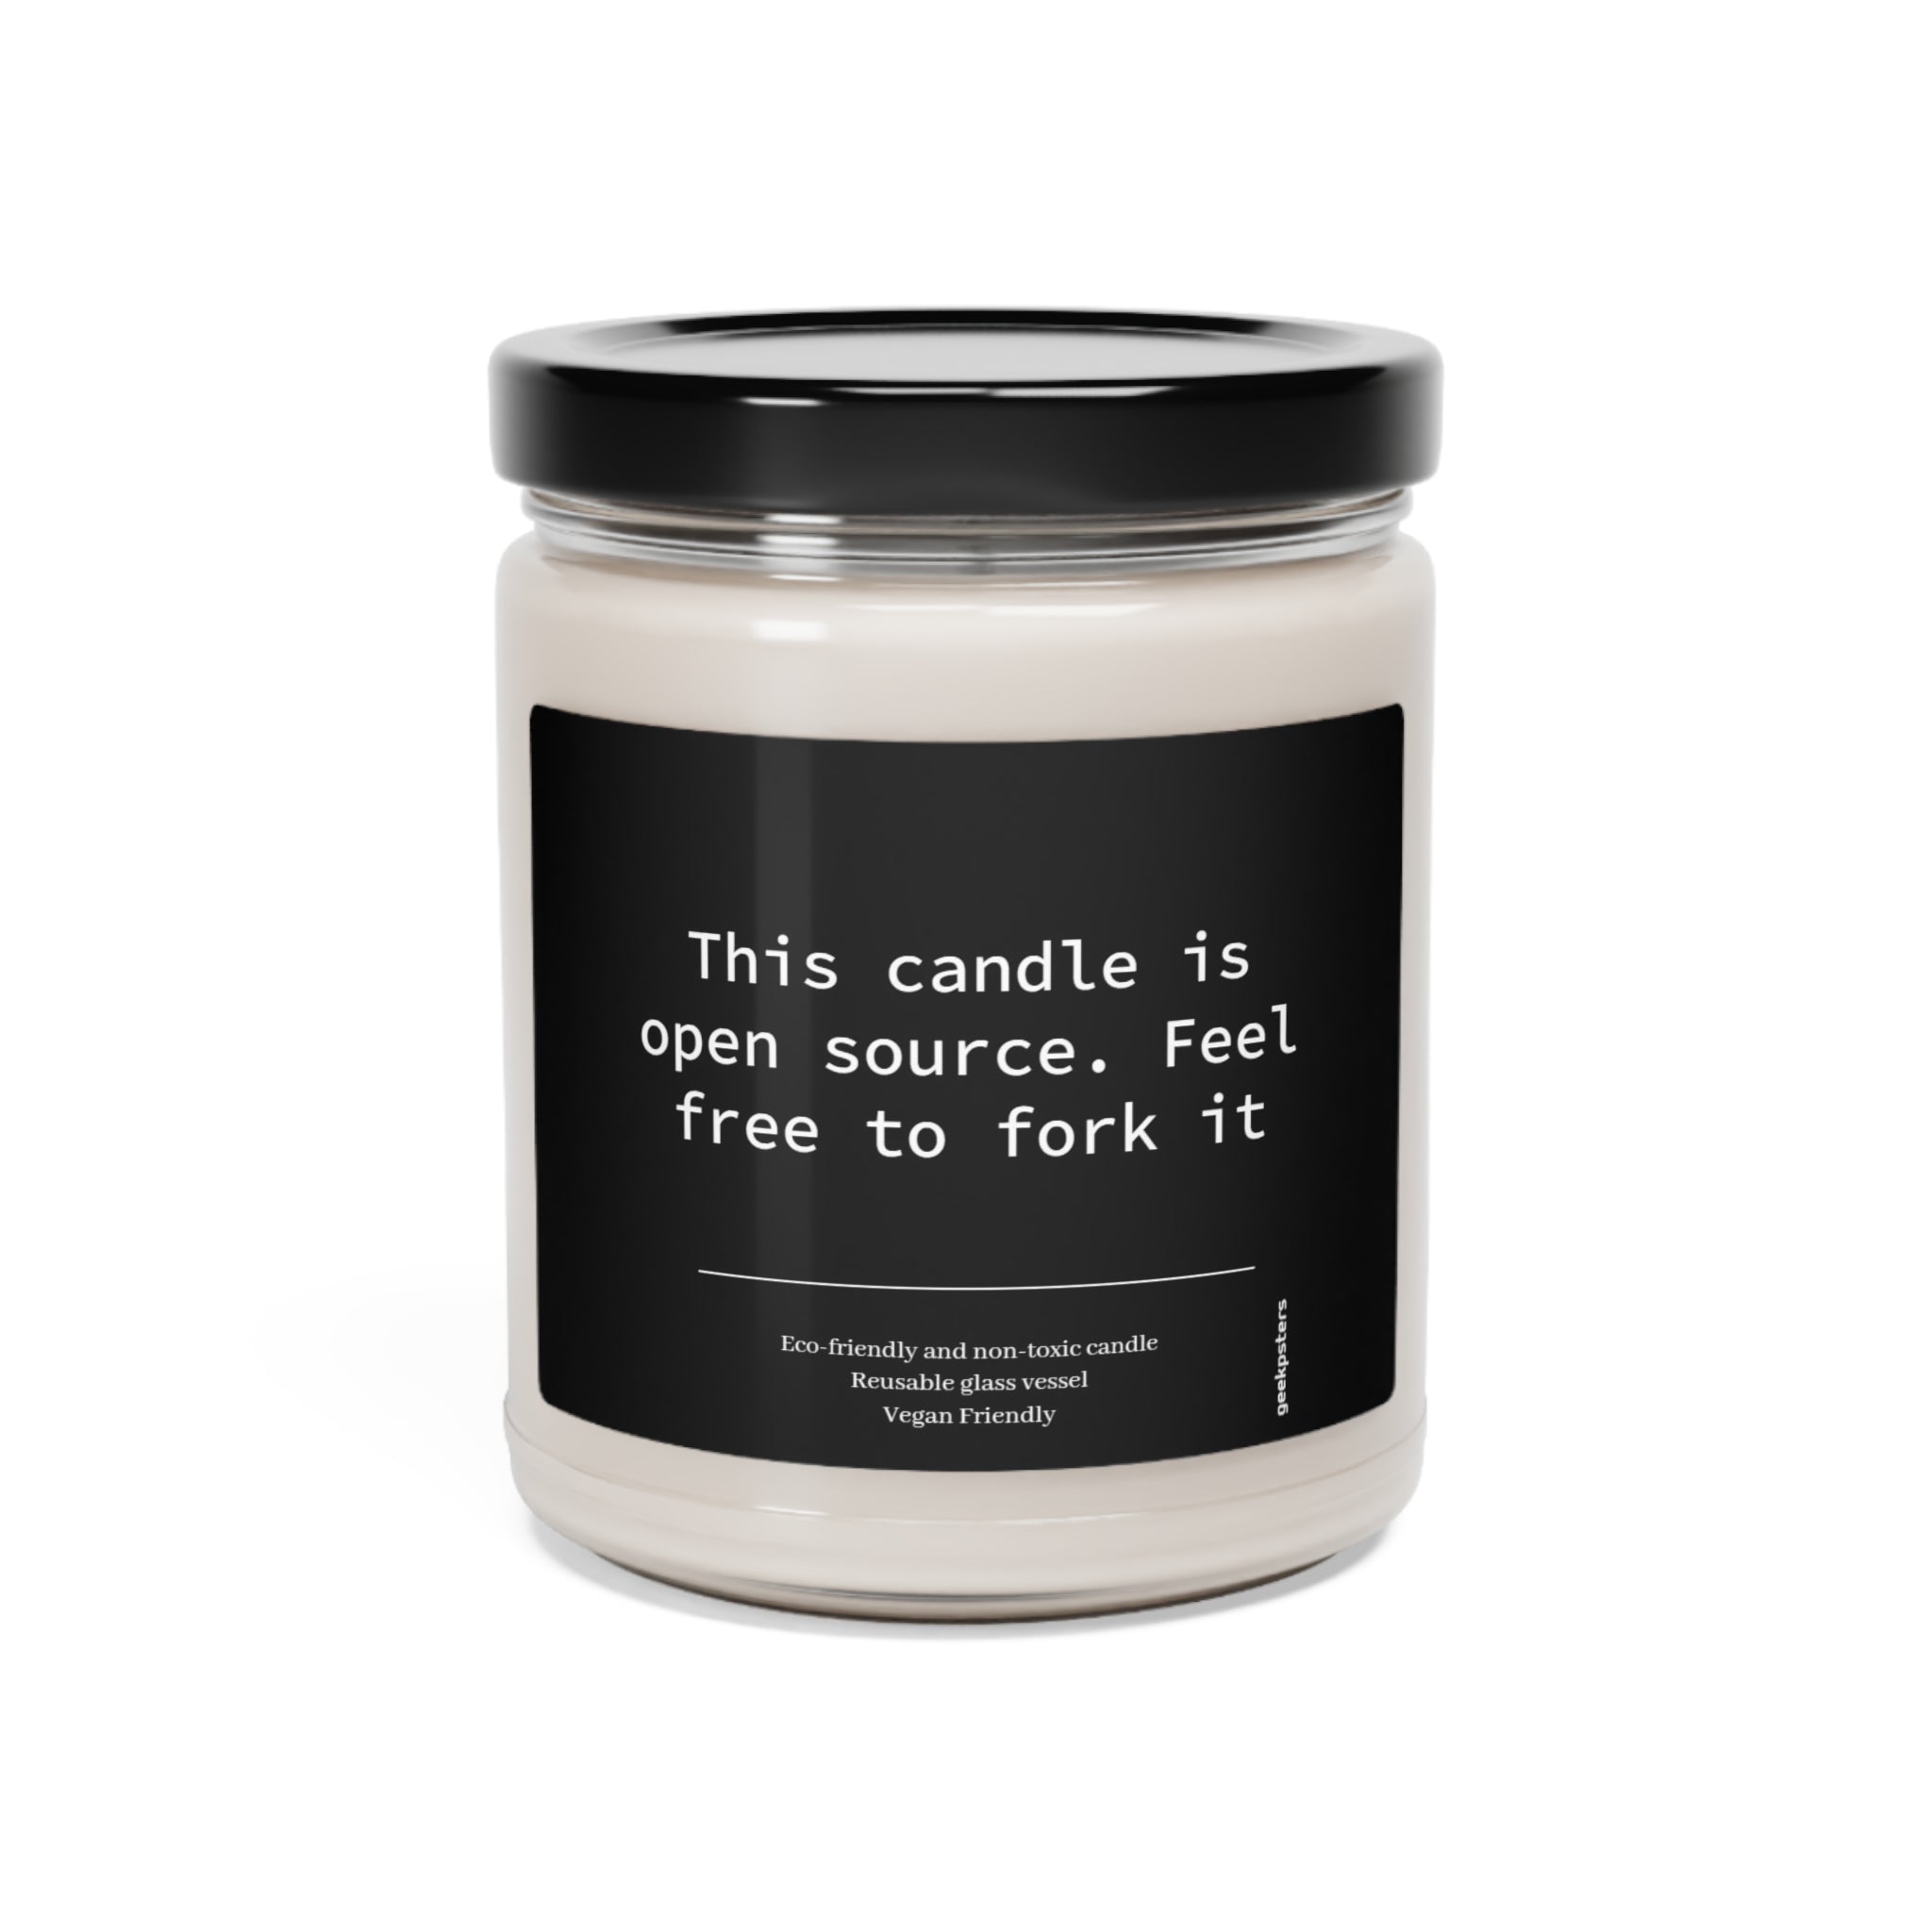 A scented Soy candle in a glass jar with a label that reads "this candle is open source. feel free to fork it" indicating it's environmentally friendly and vegan.